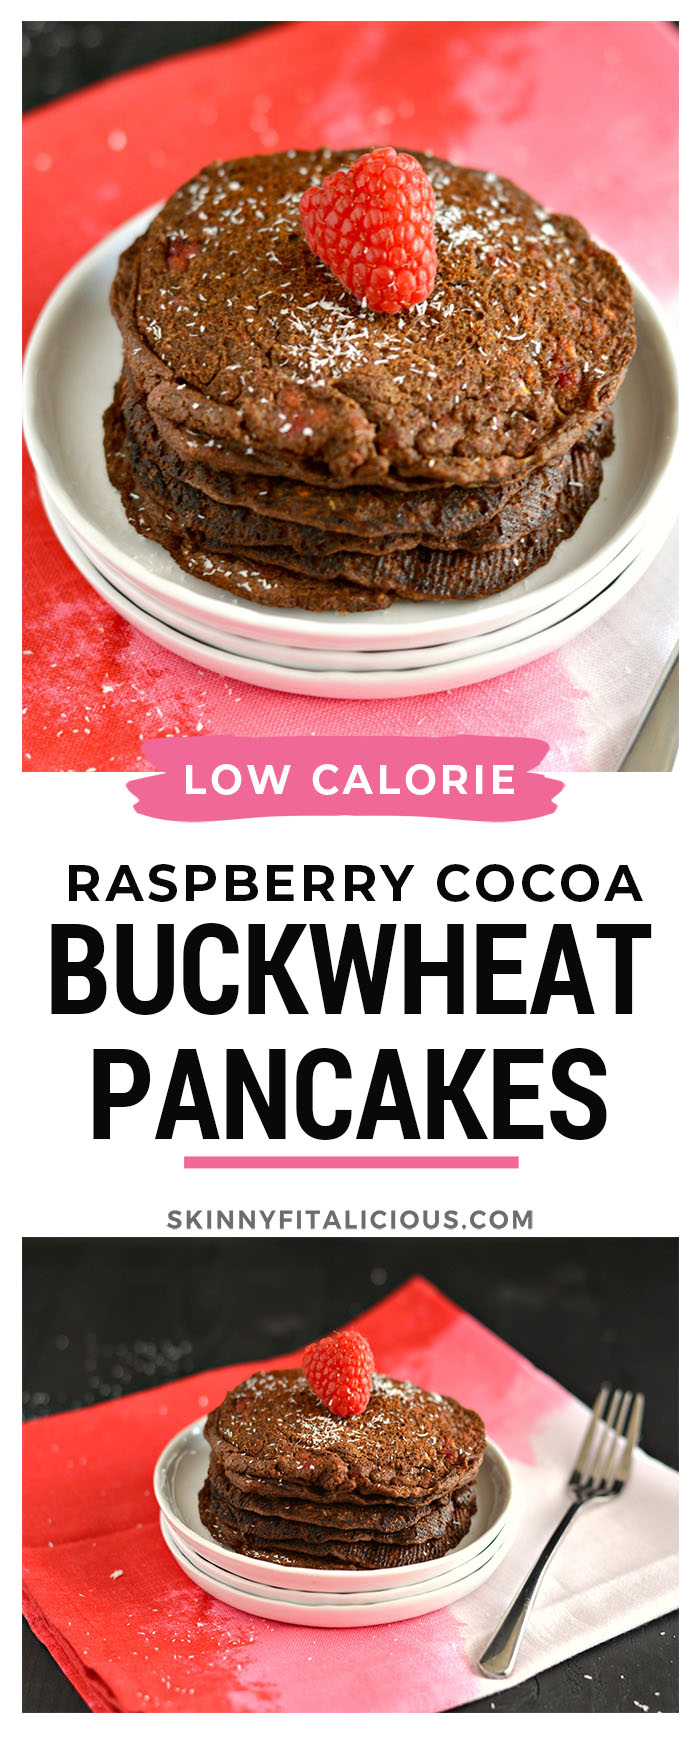 Light vegan, gluten free Raspberry Chocoholic Buckwheat Pancakes filled with warm raspberries and bursting with chocolate that's grain and dairy free. A breakfast delight that will trick any chocoholic into eating healthy. Gluten Free + Vegan + Low Calorie Healthy Recipe